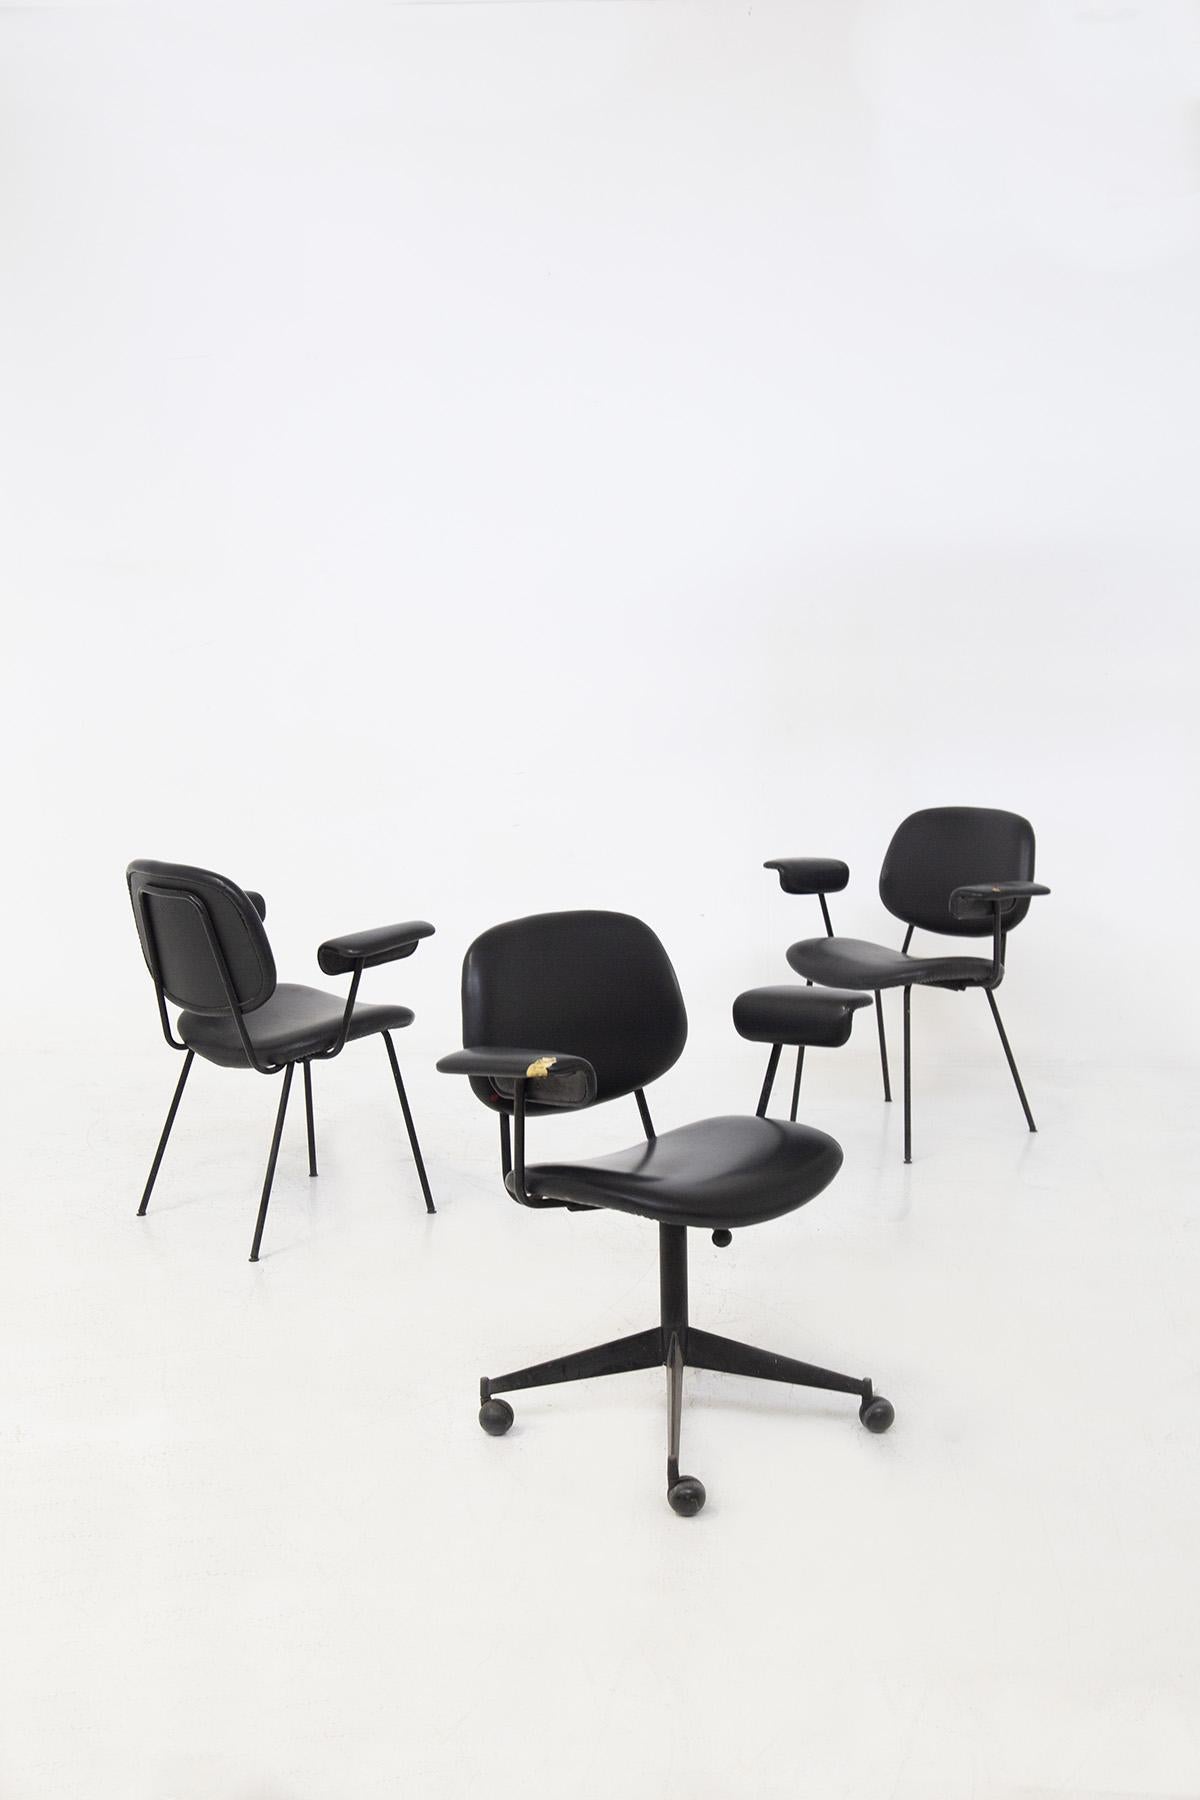 Office chairs designed by BBPR for the Olivetti manufacture in black leather from the 1960s. Under each seat we find the logo of the OLIVETTI manufacture. The chairs are sold individually . The set consists of one swivel chair with casters and two